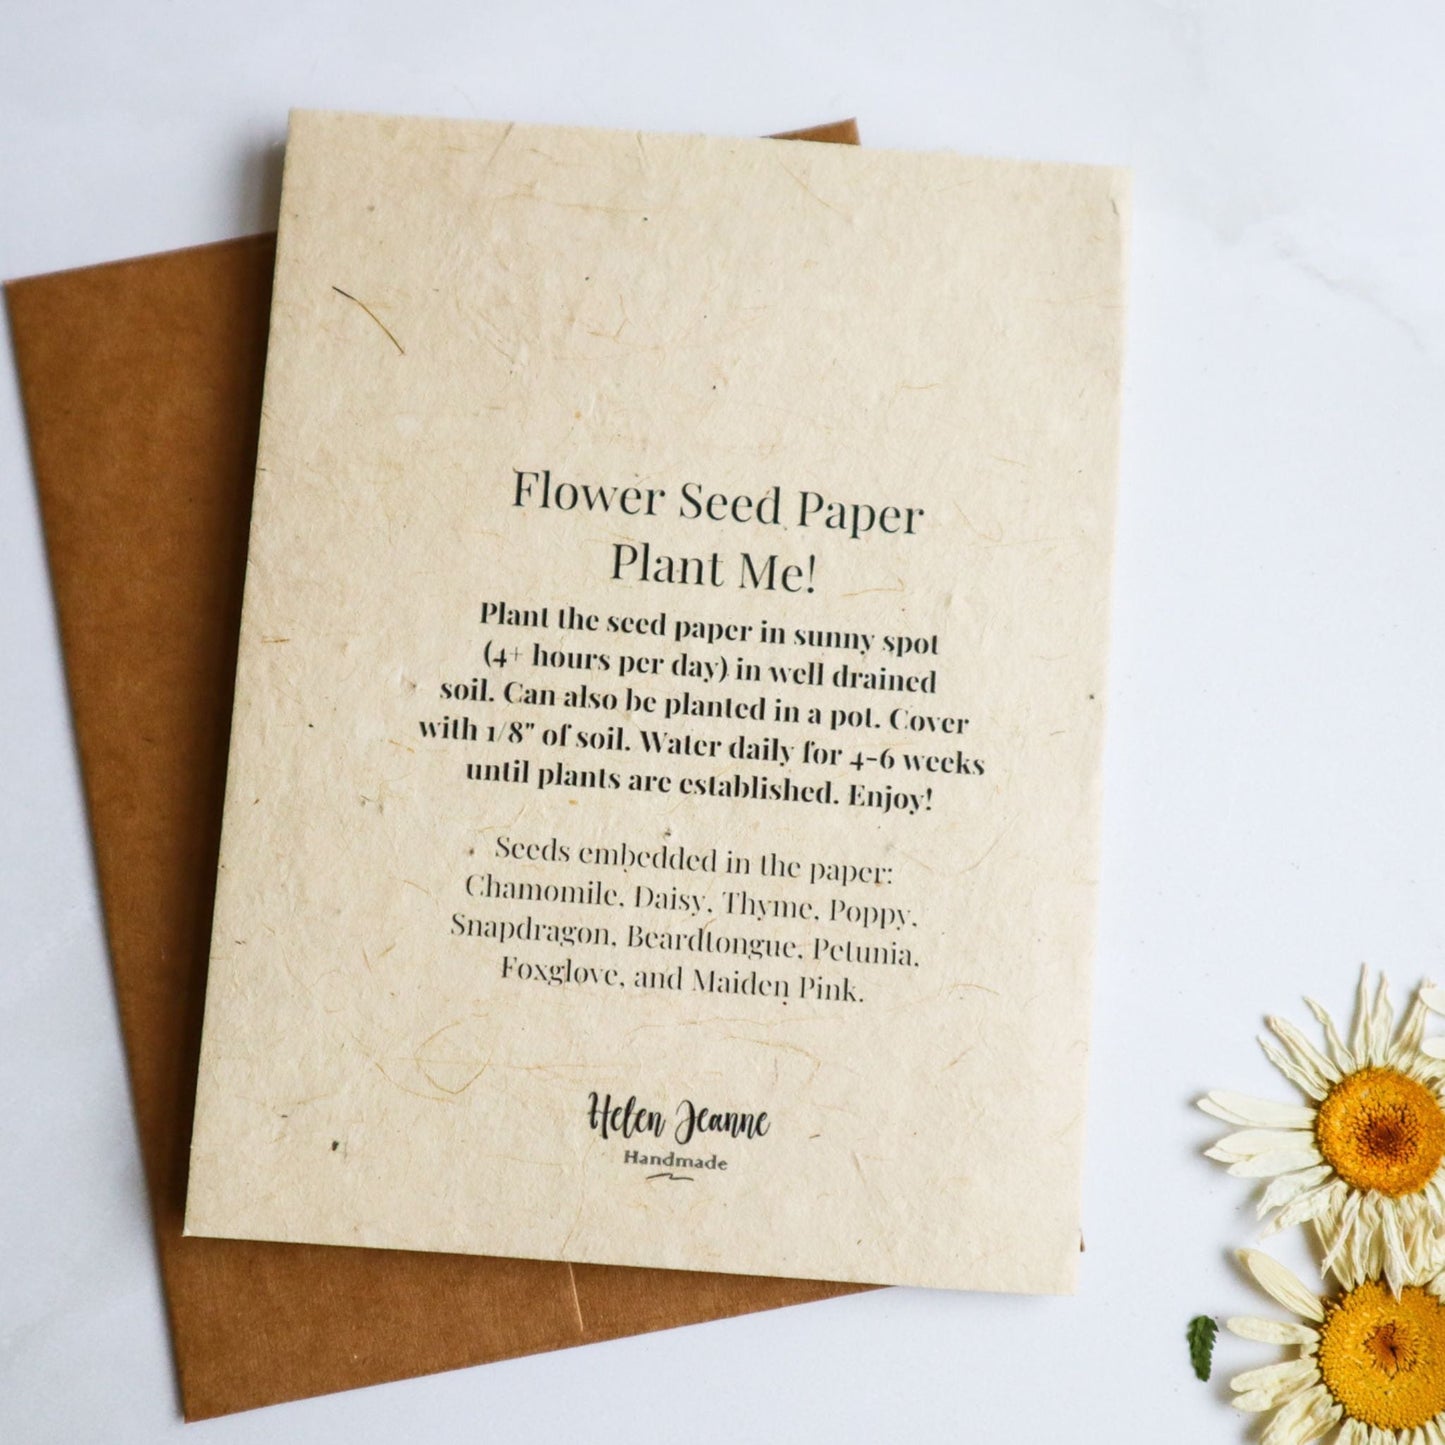 Instructions how to plant flower seed paper card by Helen Jeanne Handmade.